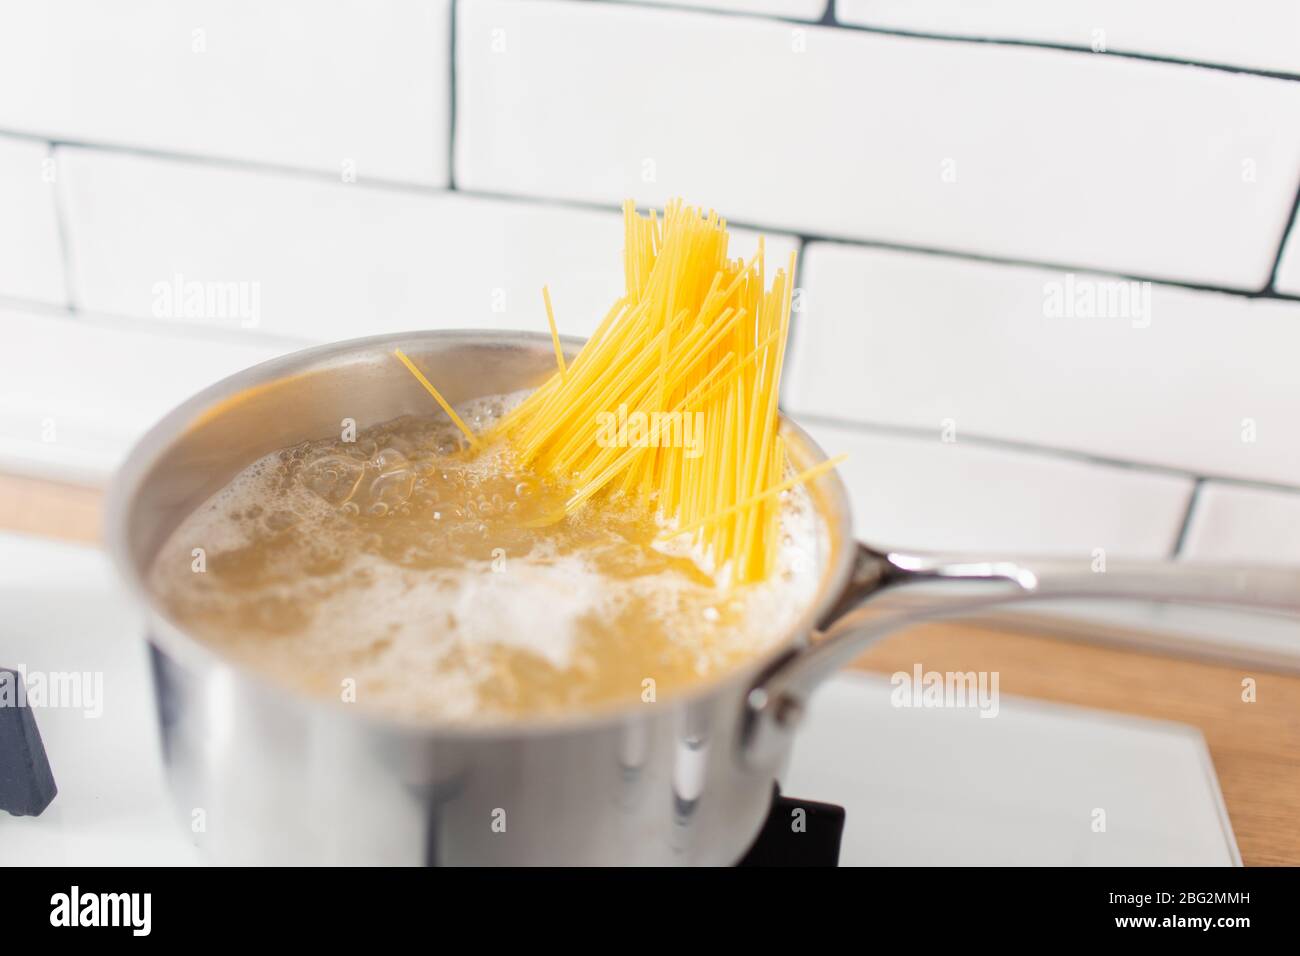 https://c8.alamy.com/comp/2BG2MMH/spaghetti-in-pan-cooking-in-boiling-water-on-a-gas-stove-yellow-gluten-free-corn-pasta-2BG2MMH.jpg